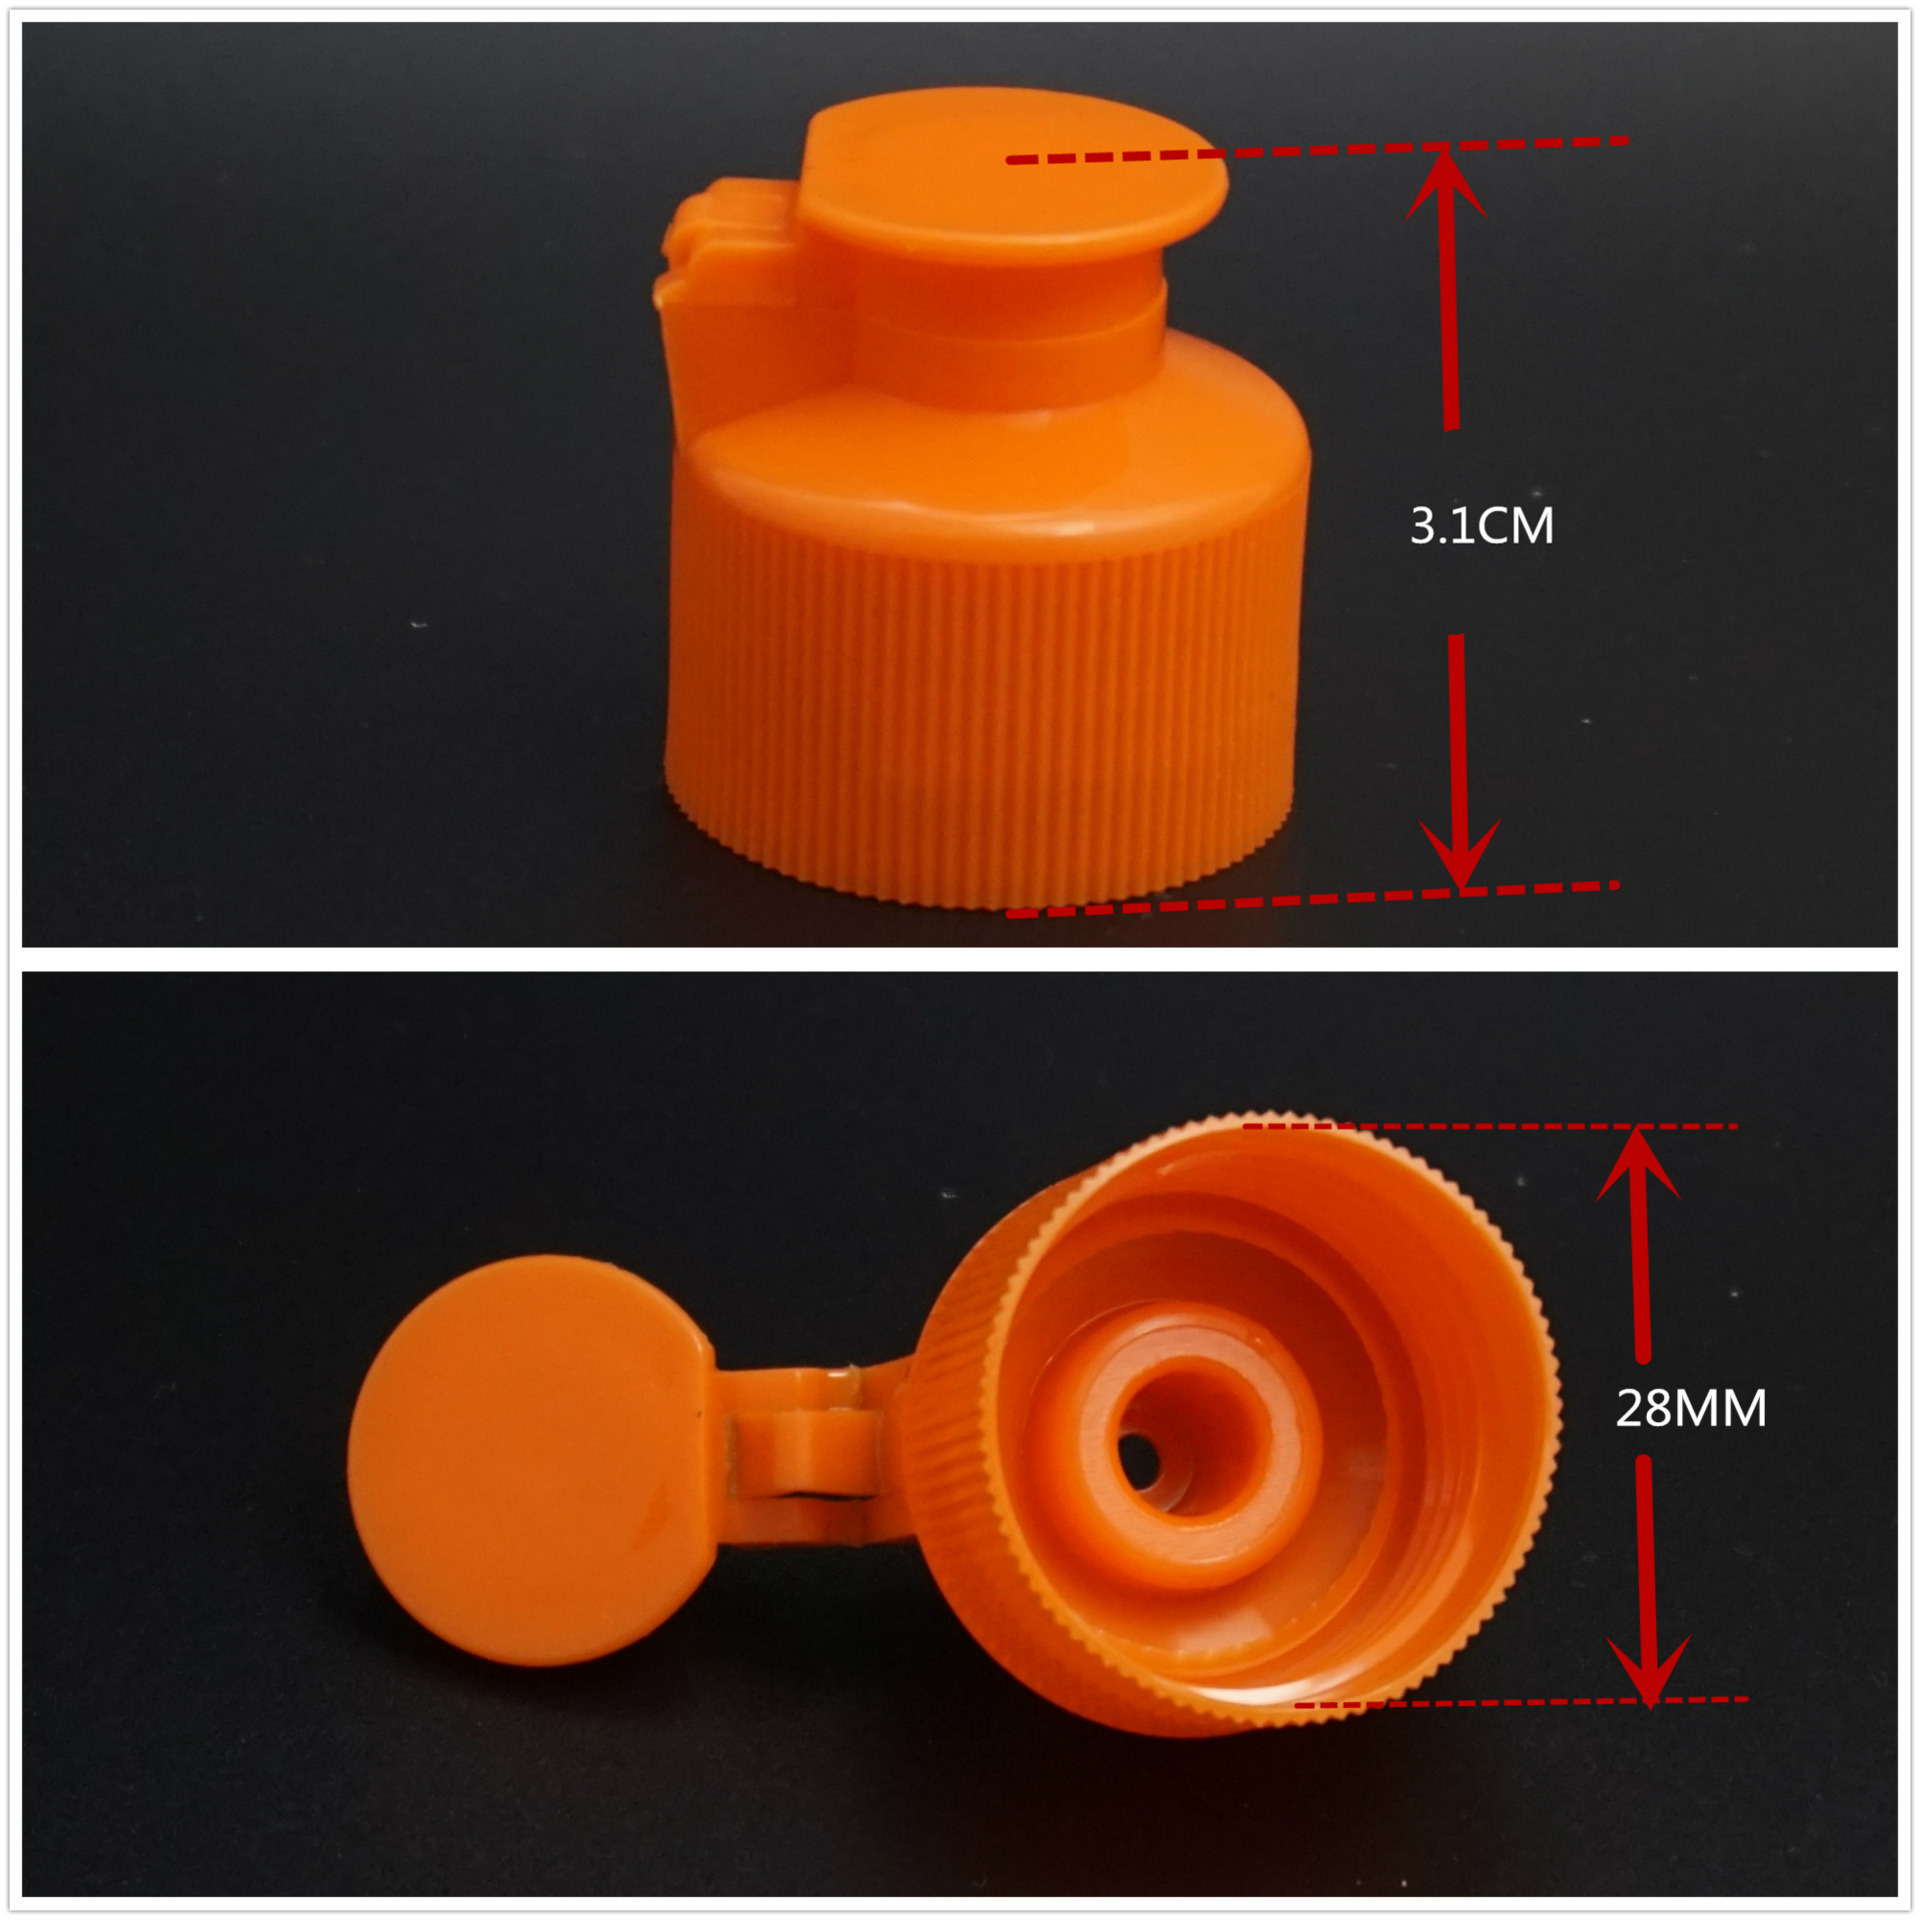 increase in height Plastic Detergent Flip bottle cap Cutter teeth mould 3W 28 high-grade Nozzle doctor